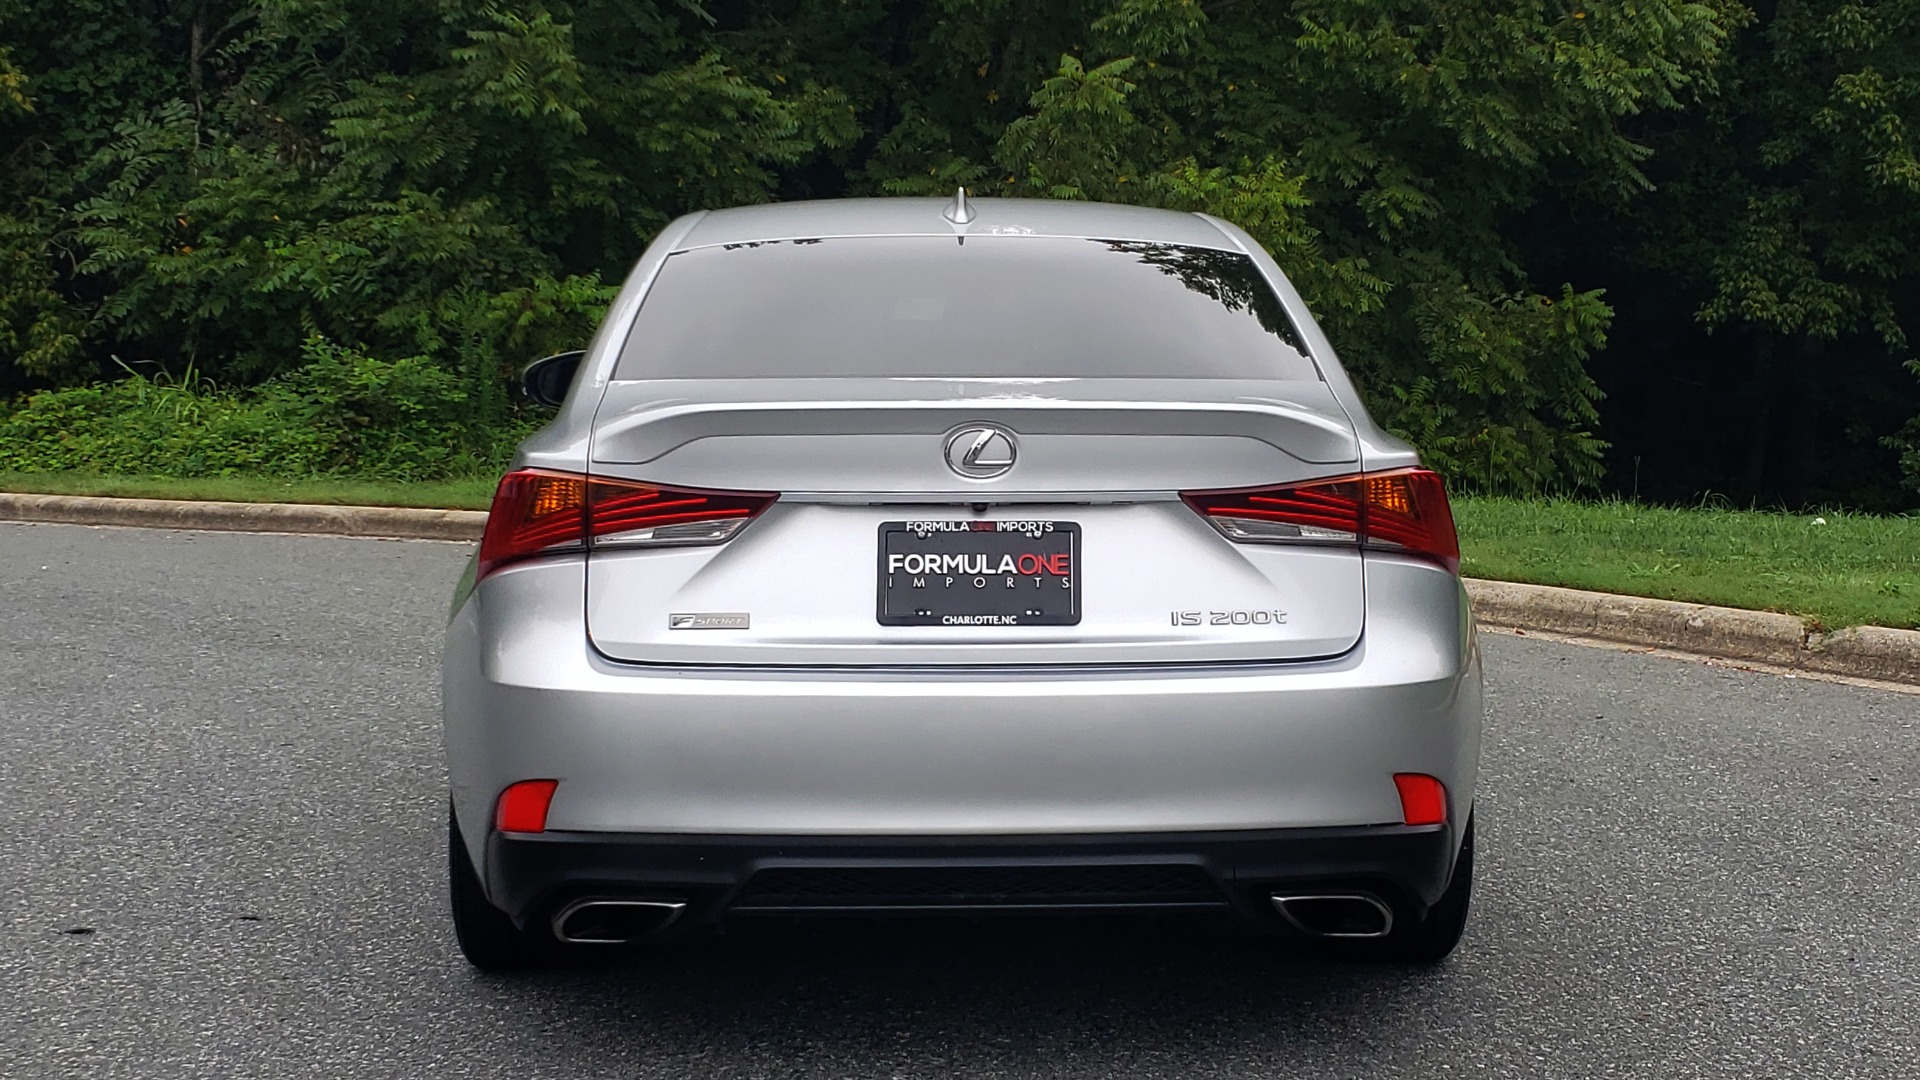 Used 2017 Lexus IS 200T F-SPORT / LEATHER / SUNROOF / 18IN WHEELS / REARVIEW for sale Sold at Formula Imports in Charlotte NC 28227 29